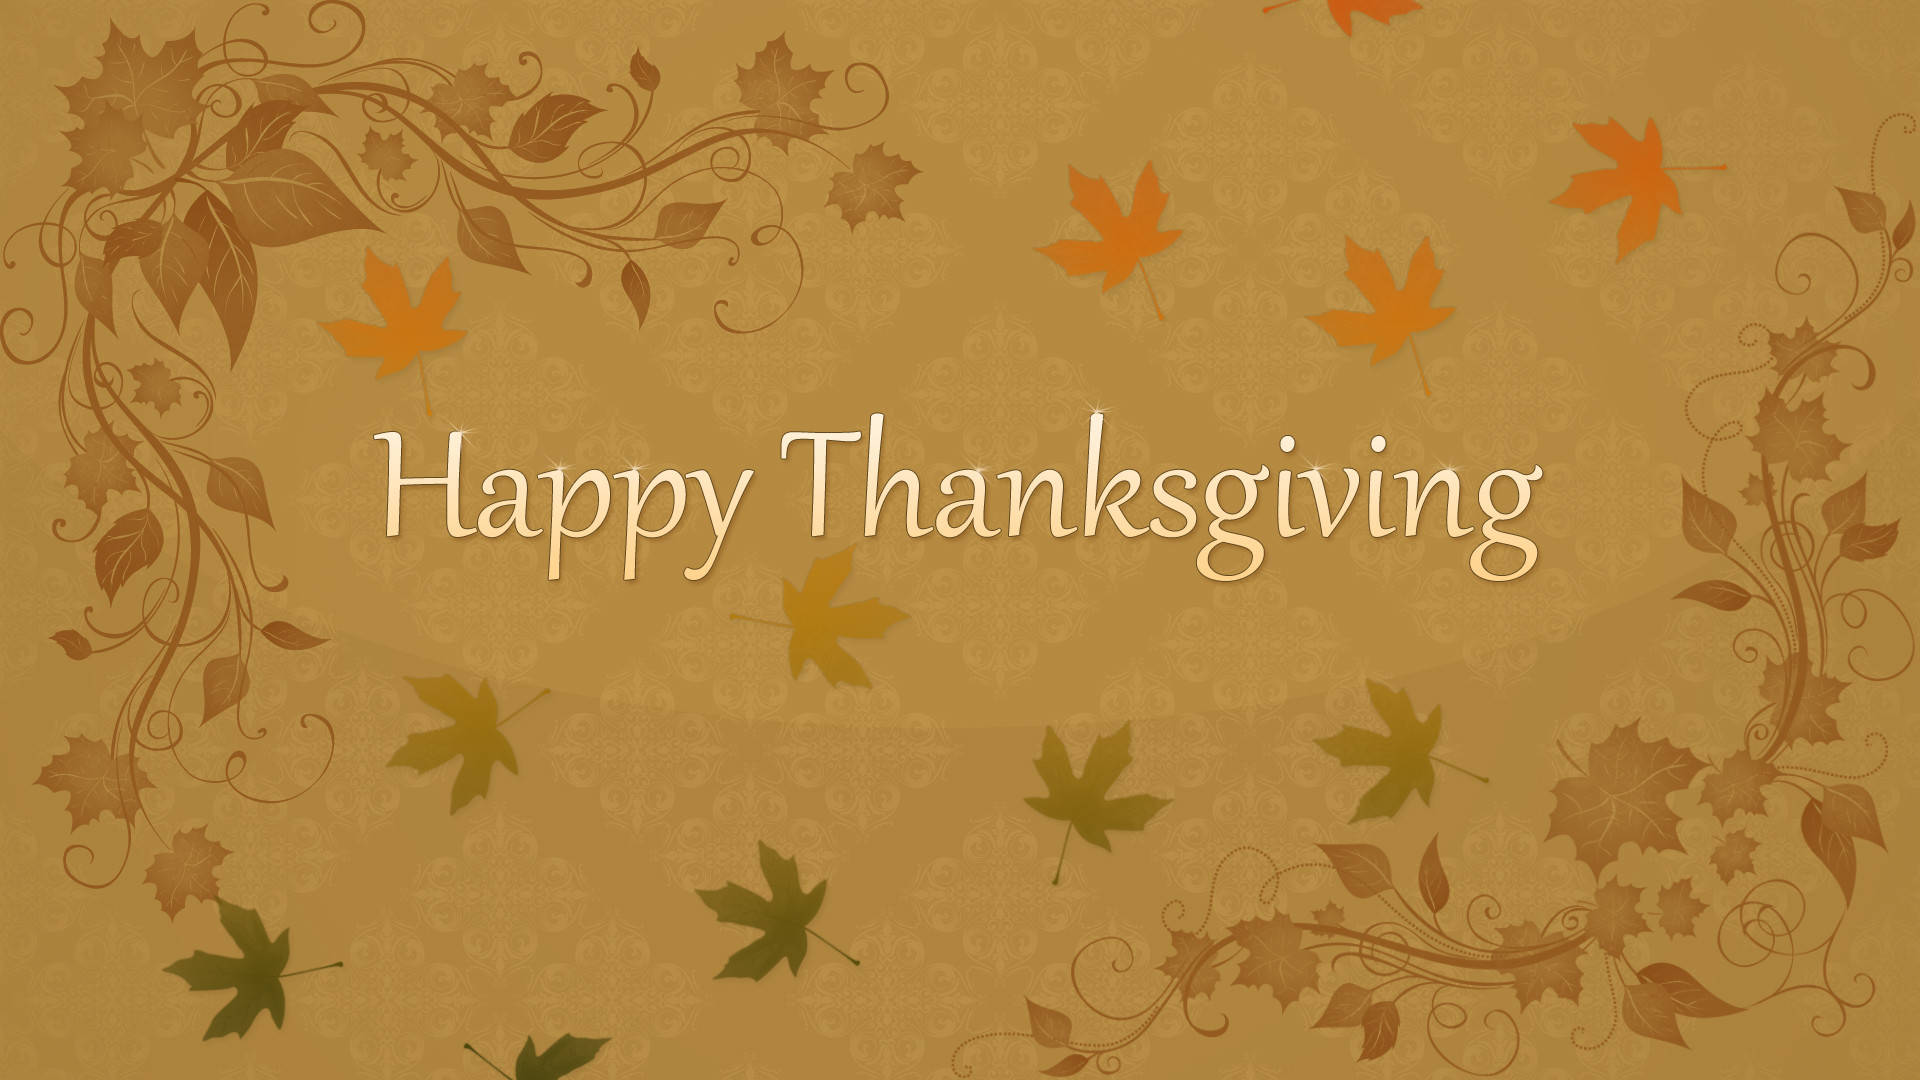 Happy Thanksgiving Day Message